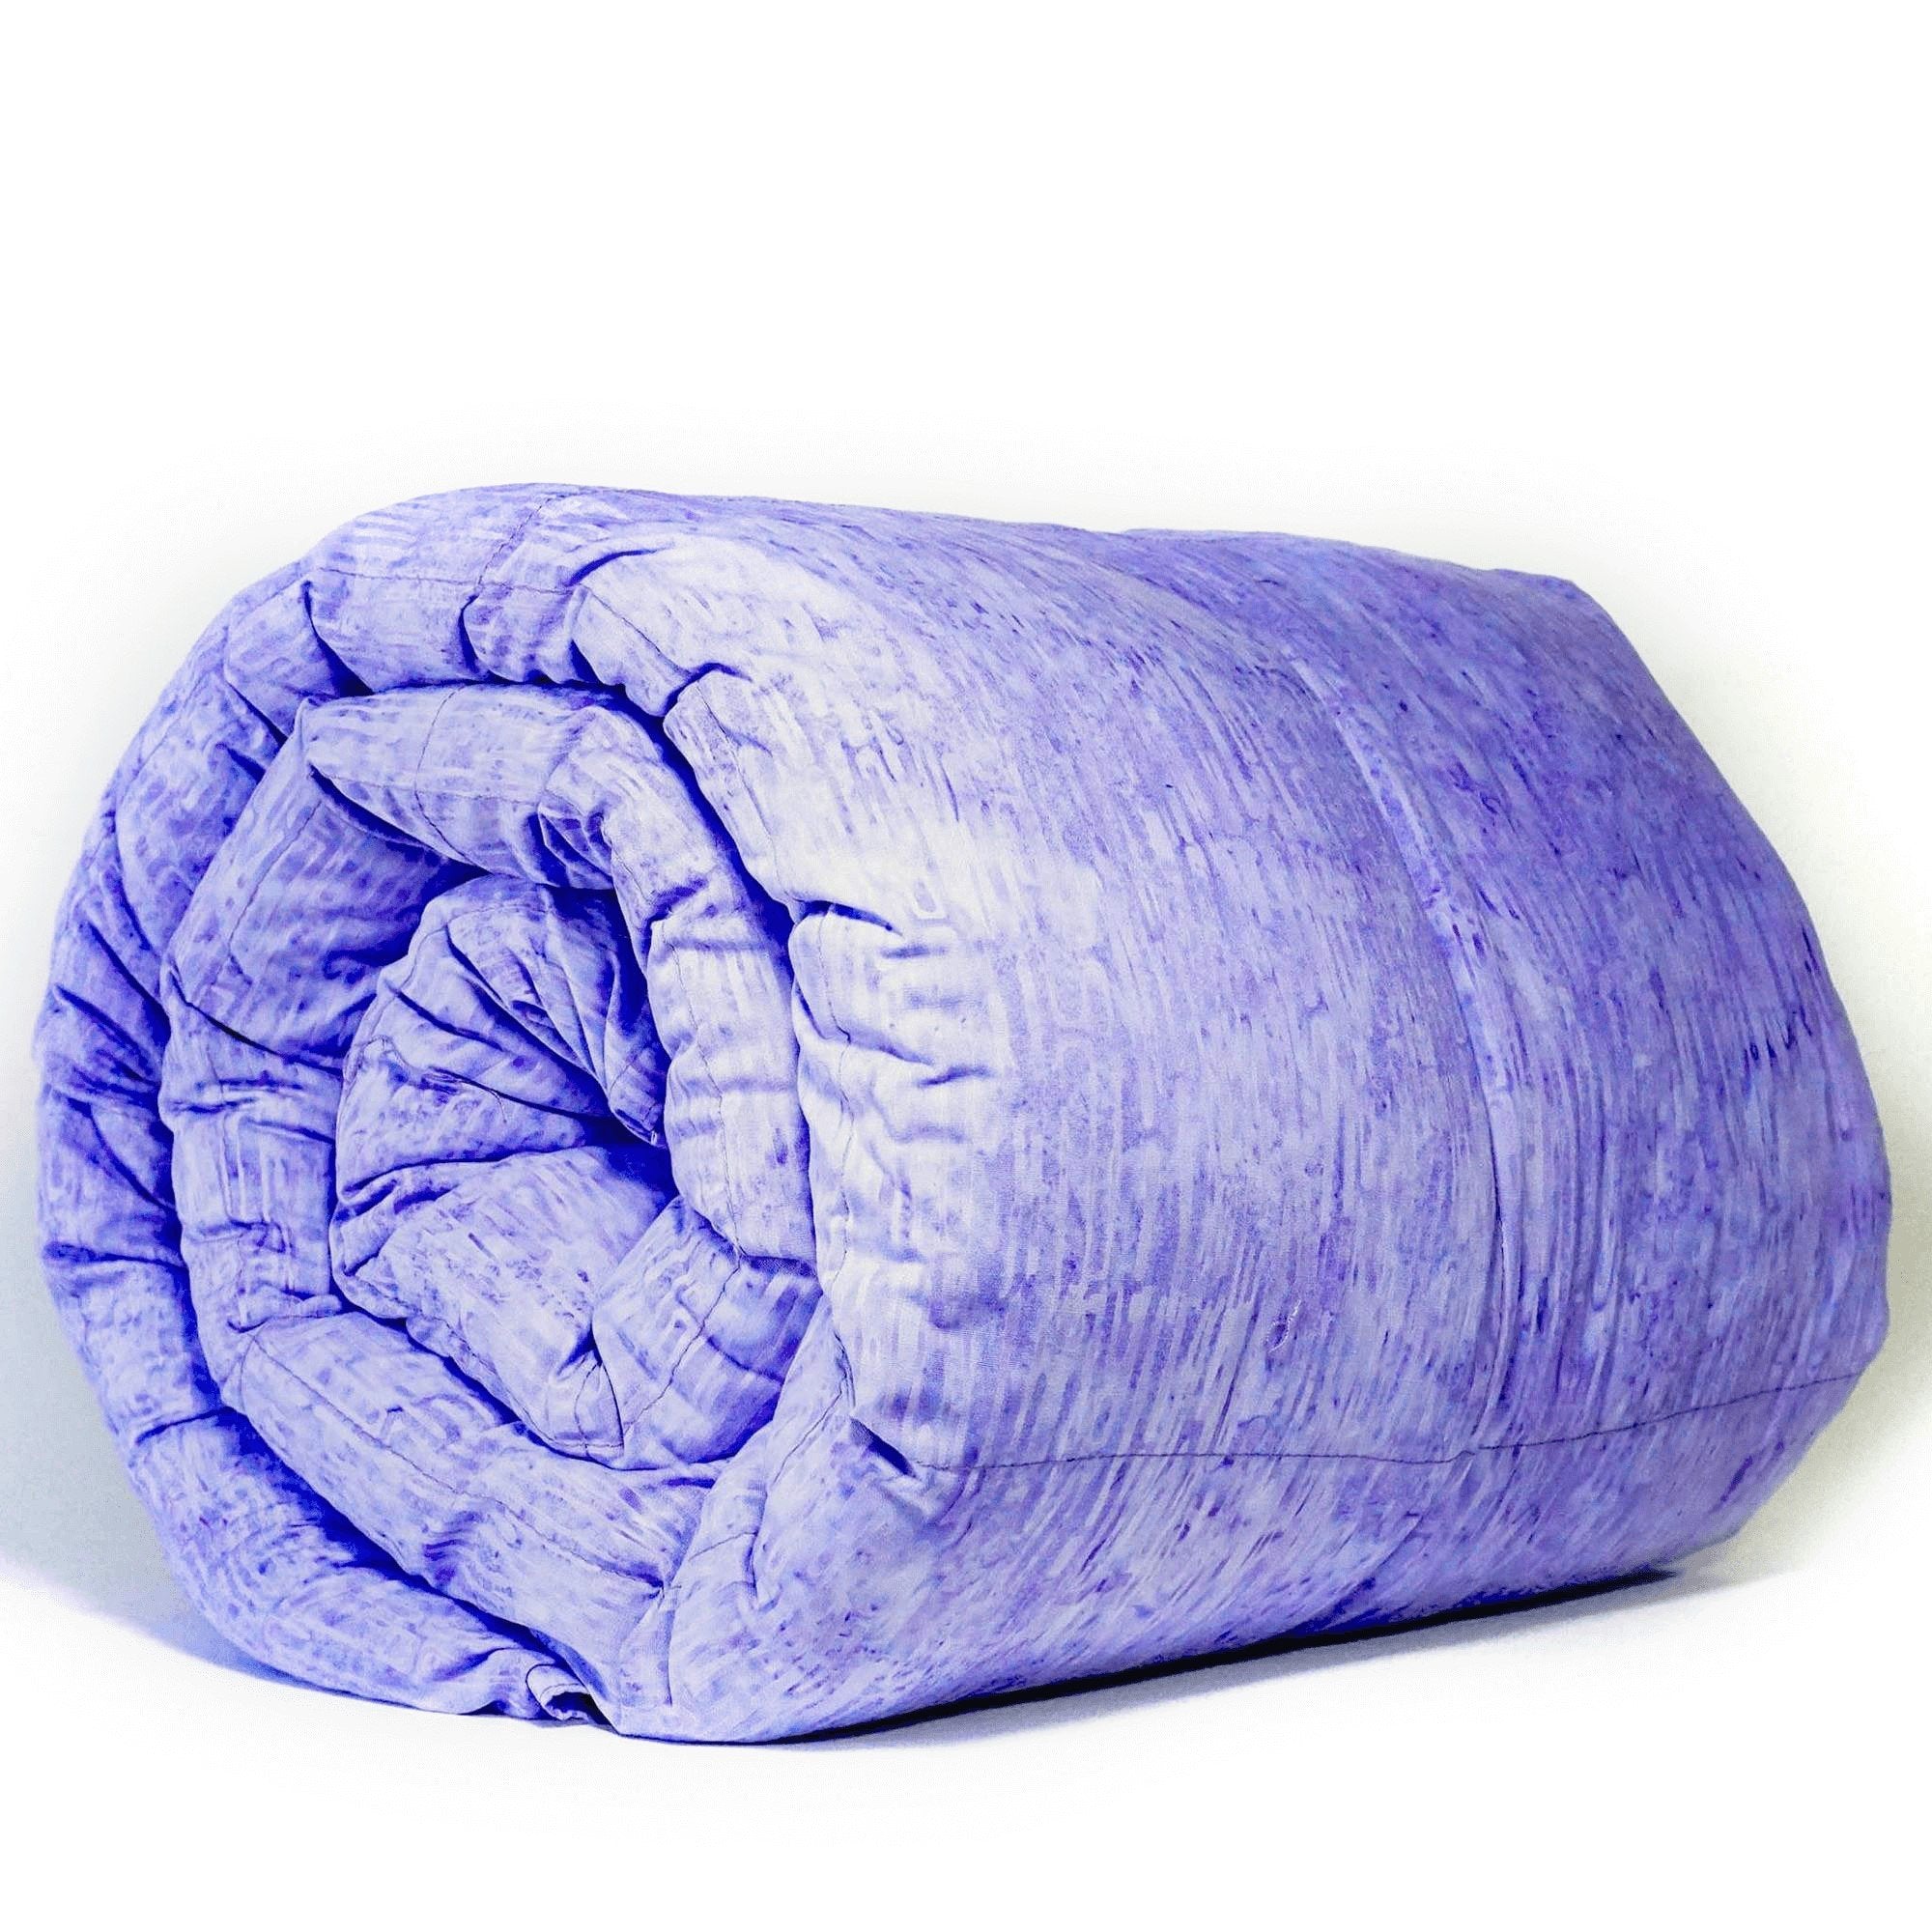 Woman snuggled under her Mosaic Weighted Blankets Indigo Purple Weighted Blanket on the couch